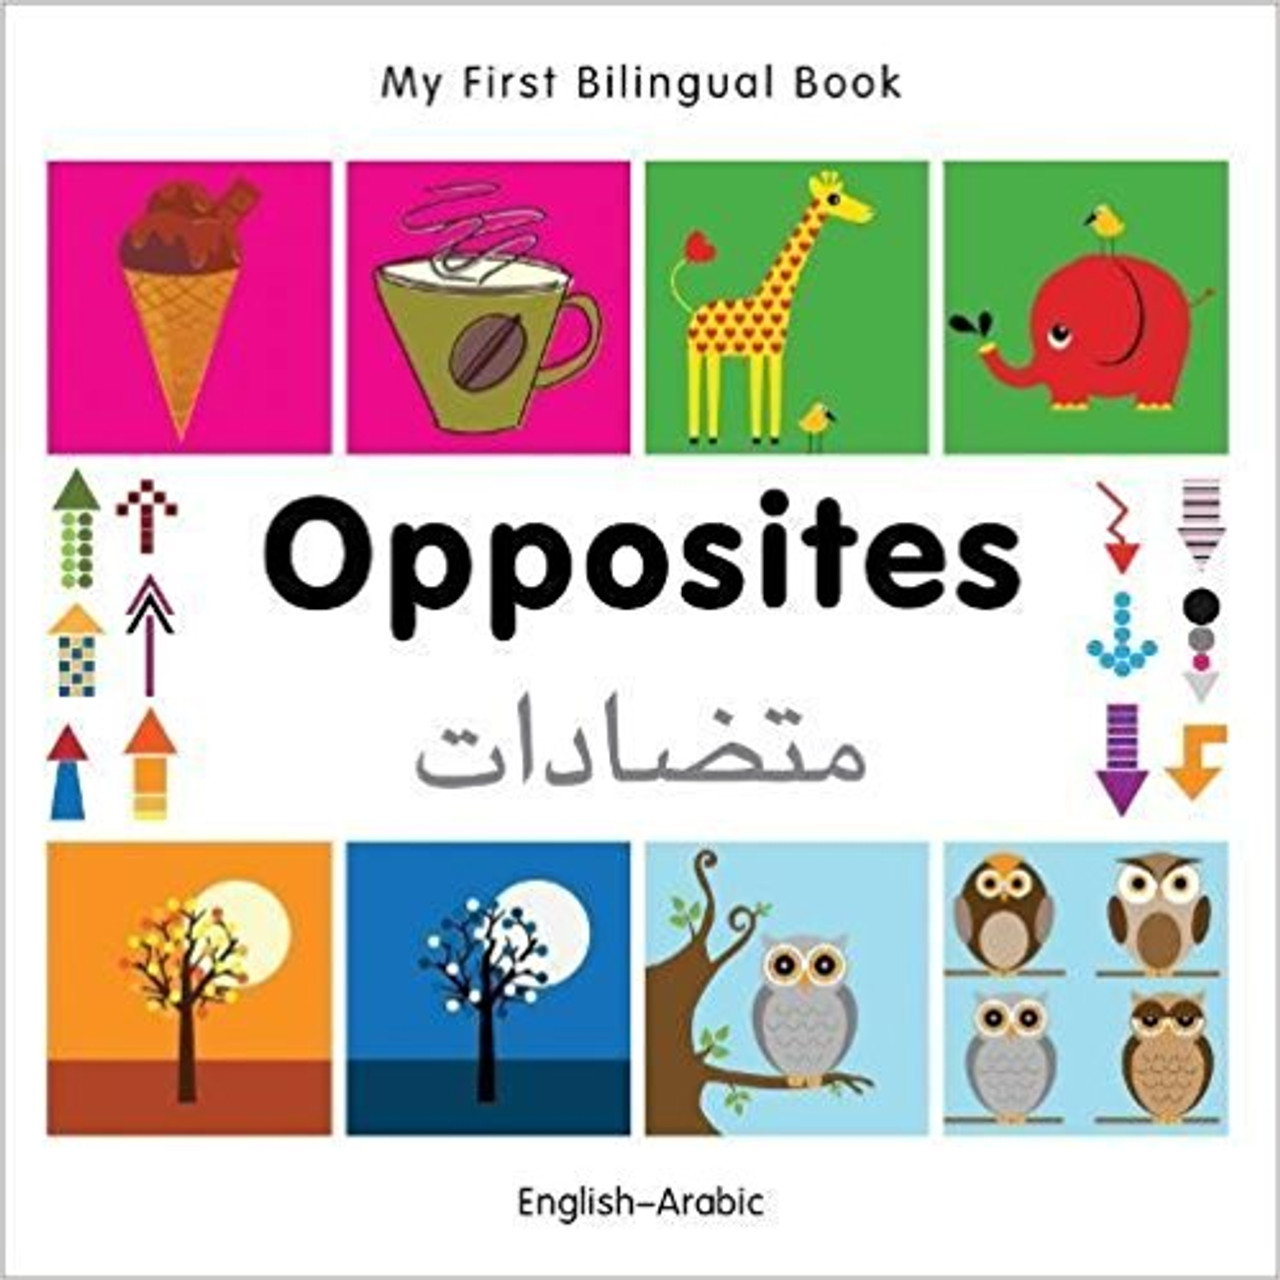 Opposites (Arabic) by Millet Publishing